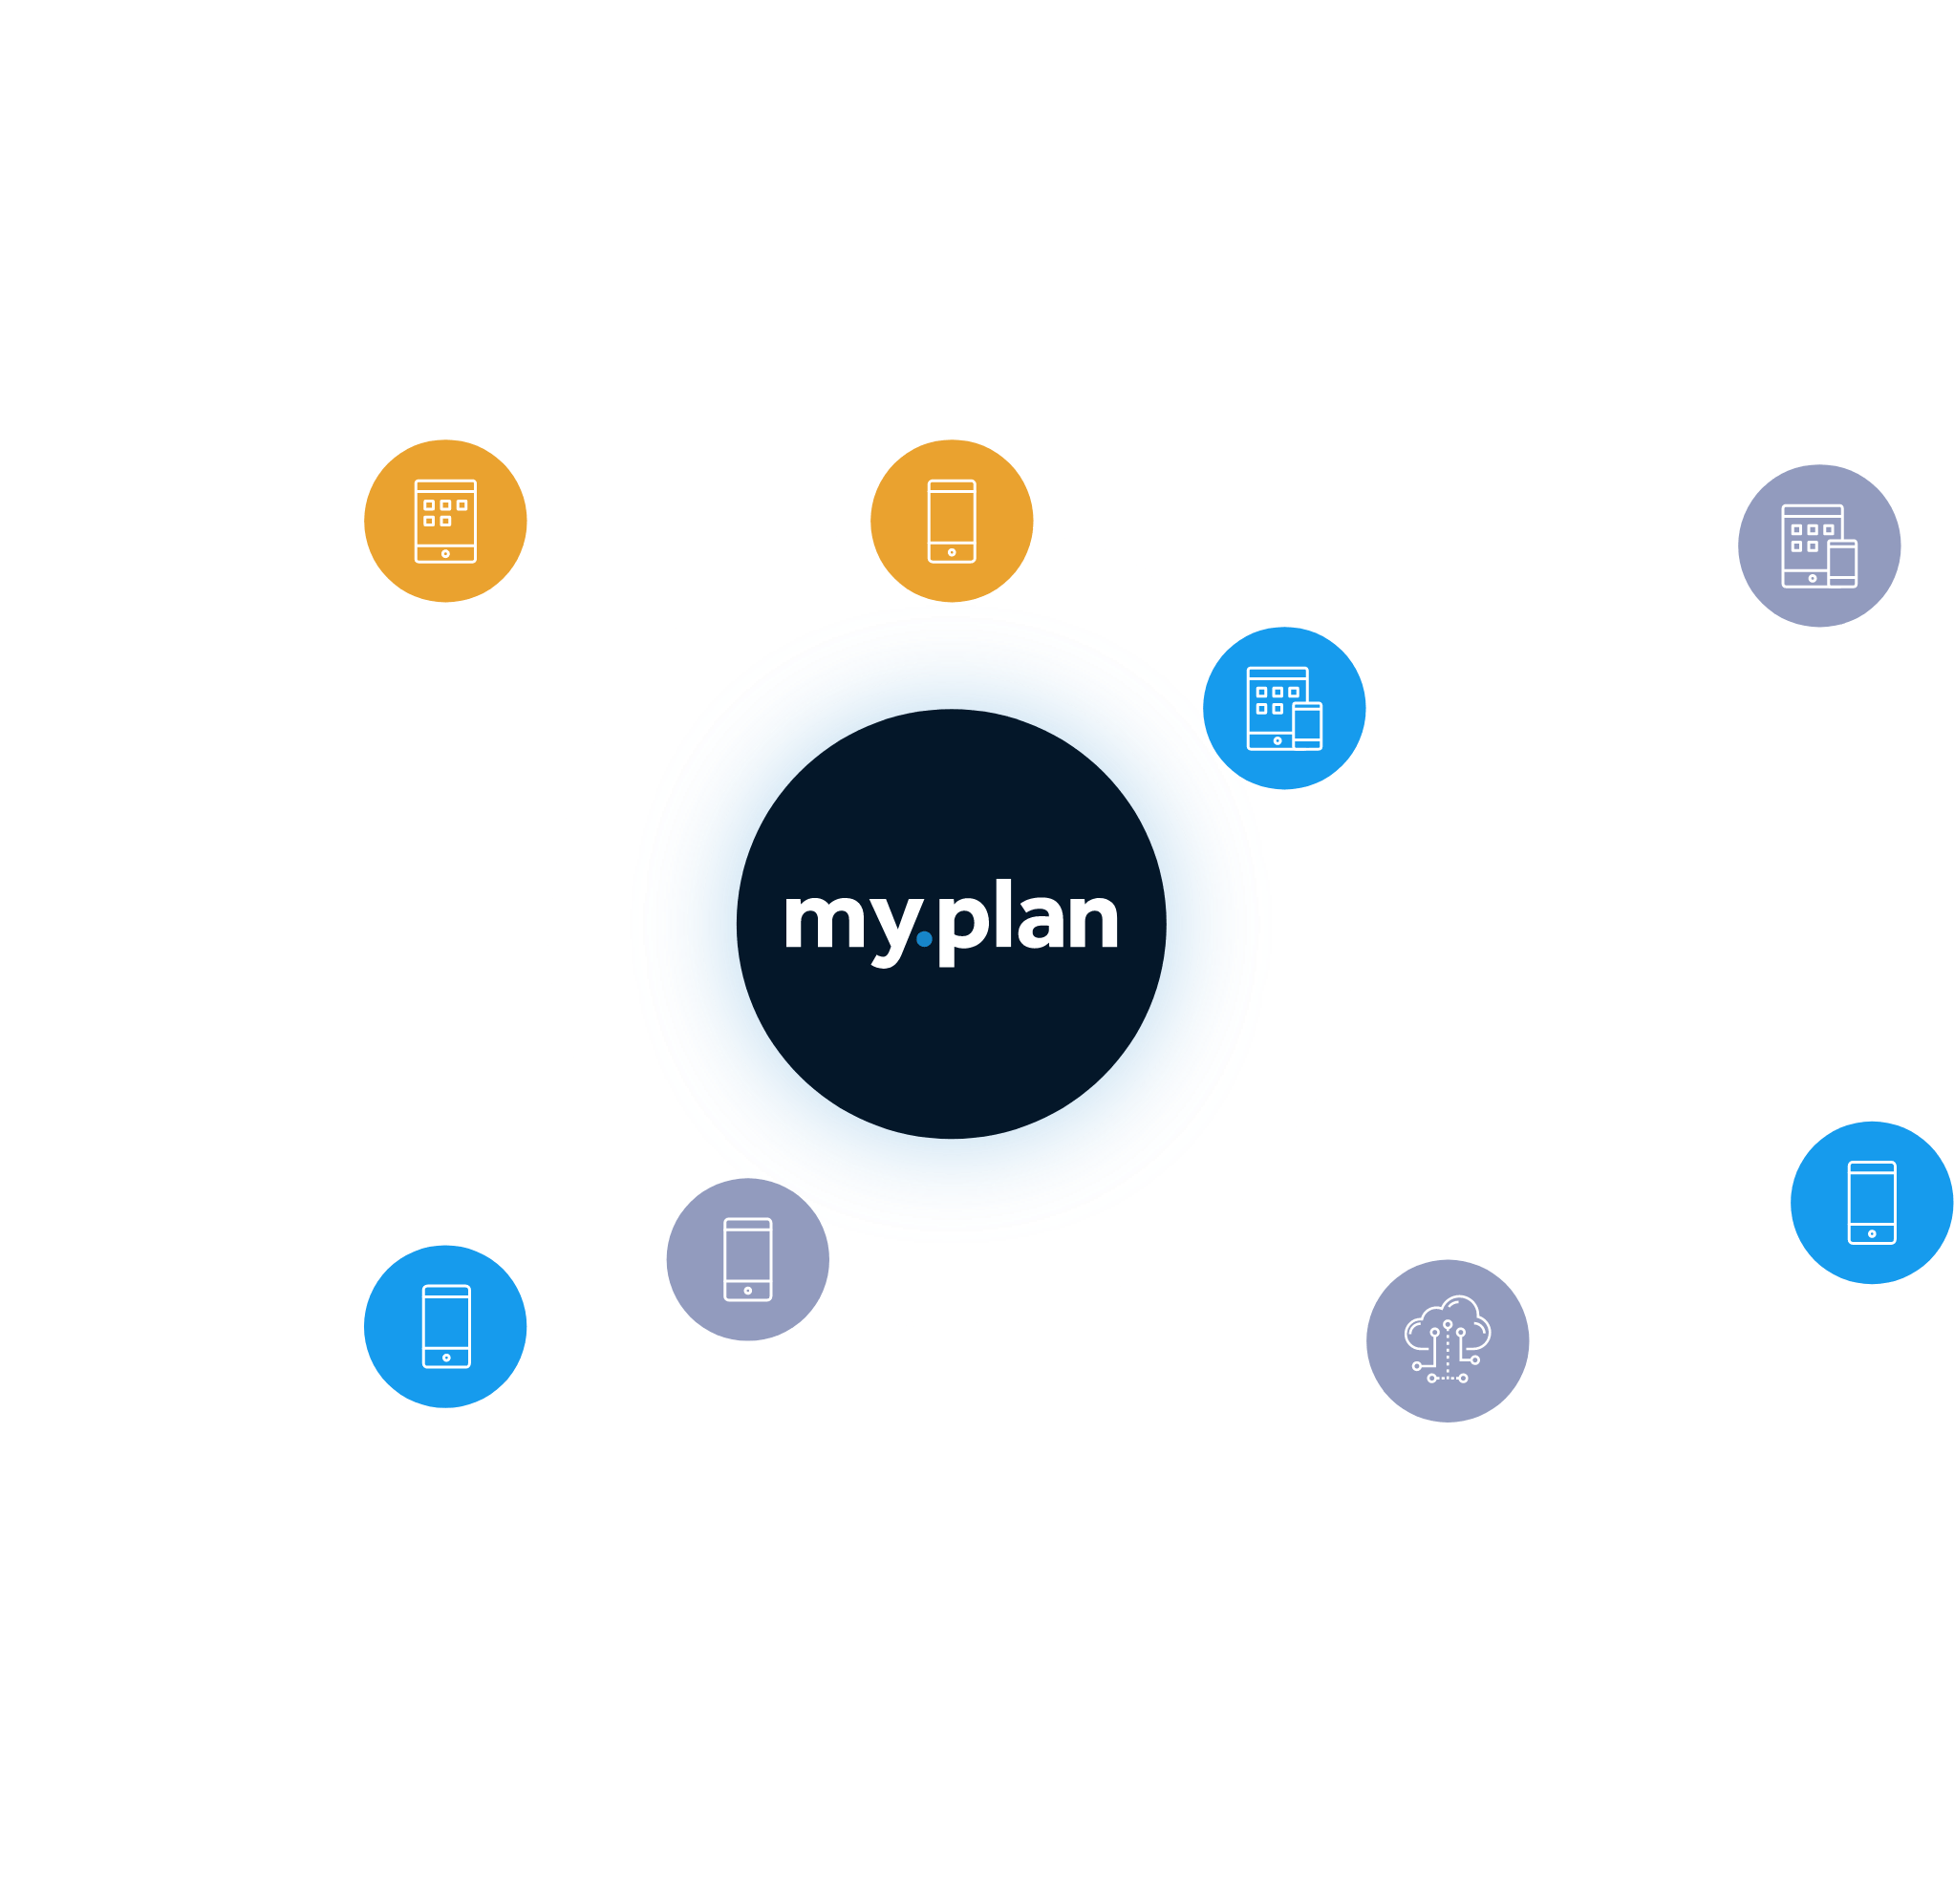 Find out more about my.plan